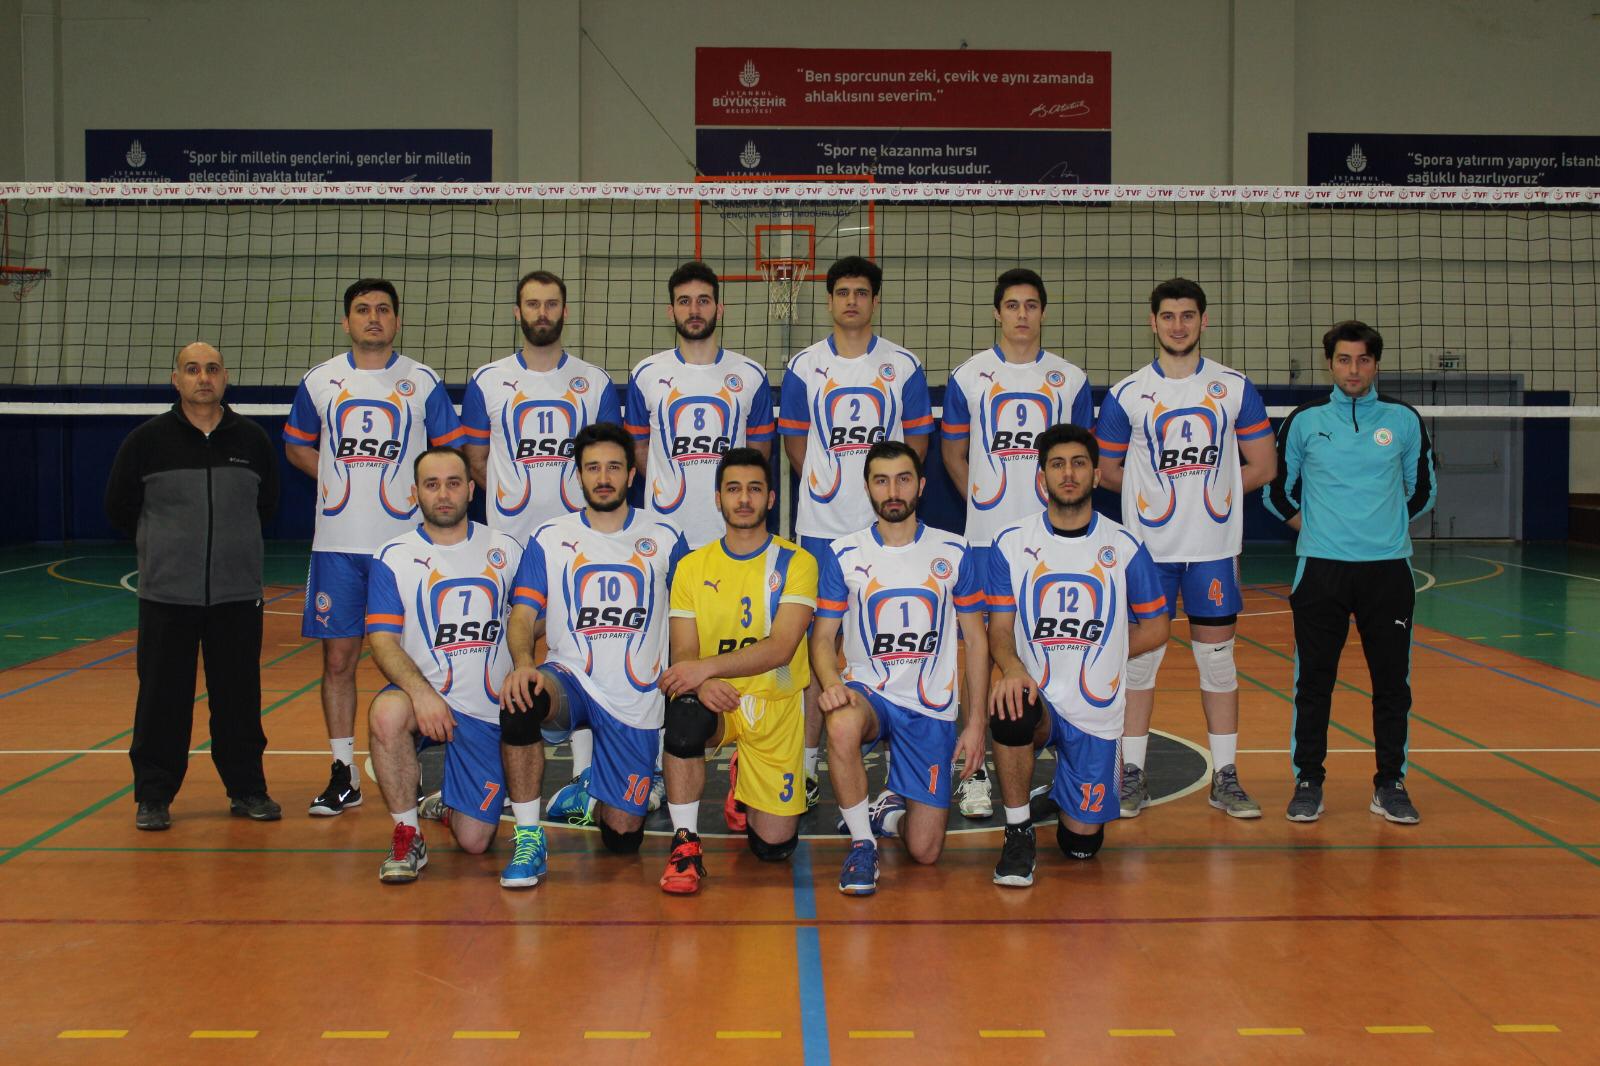 <p>BSG Auto Parts sponsored the Topkapı Schools Men's Volleyball Team throughout the year. The team, which managed to qualify for Men's finals has completed the tournament in the second place in which 32 teams from 7 regions competed. </p>

<p>In 2018-2019 season, the volleyball men's team finished second in the group A competition in which they competed against Yeniköy, ITU and Teşvikiye Sports Clubs in the regional league. In the next season, the team will continue to make moves to improve the quality of the player line-up to get to the 1st league. BSG Auto Parts, is determined to contribute to the society not only by investing in the automotive industry but also supporting the youth in every possible occasion.</p>